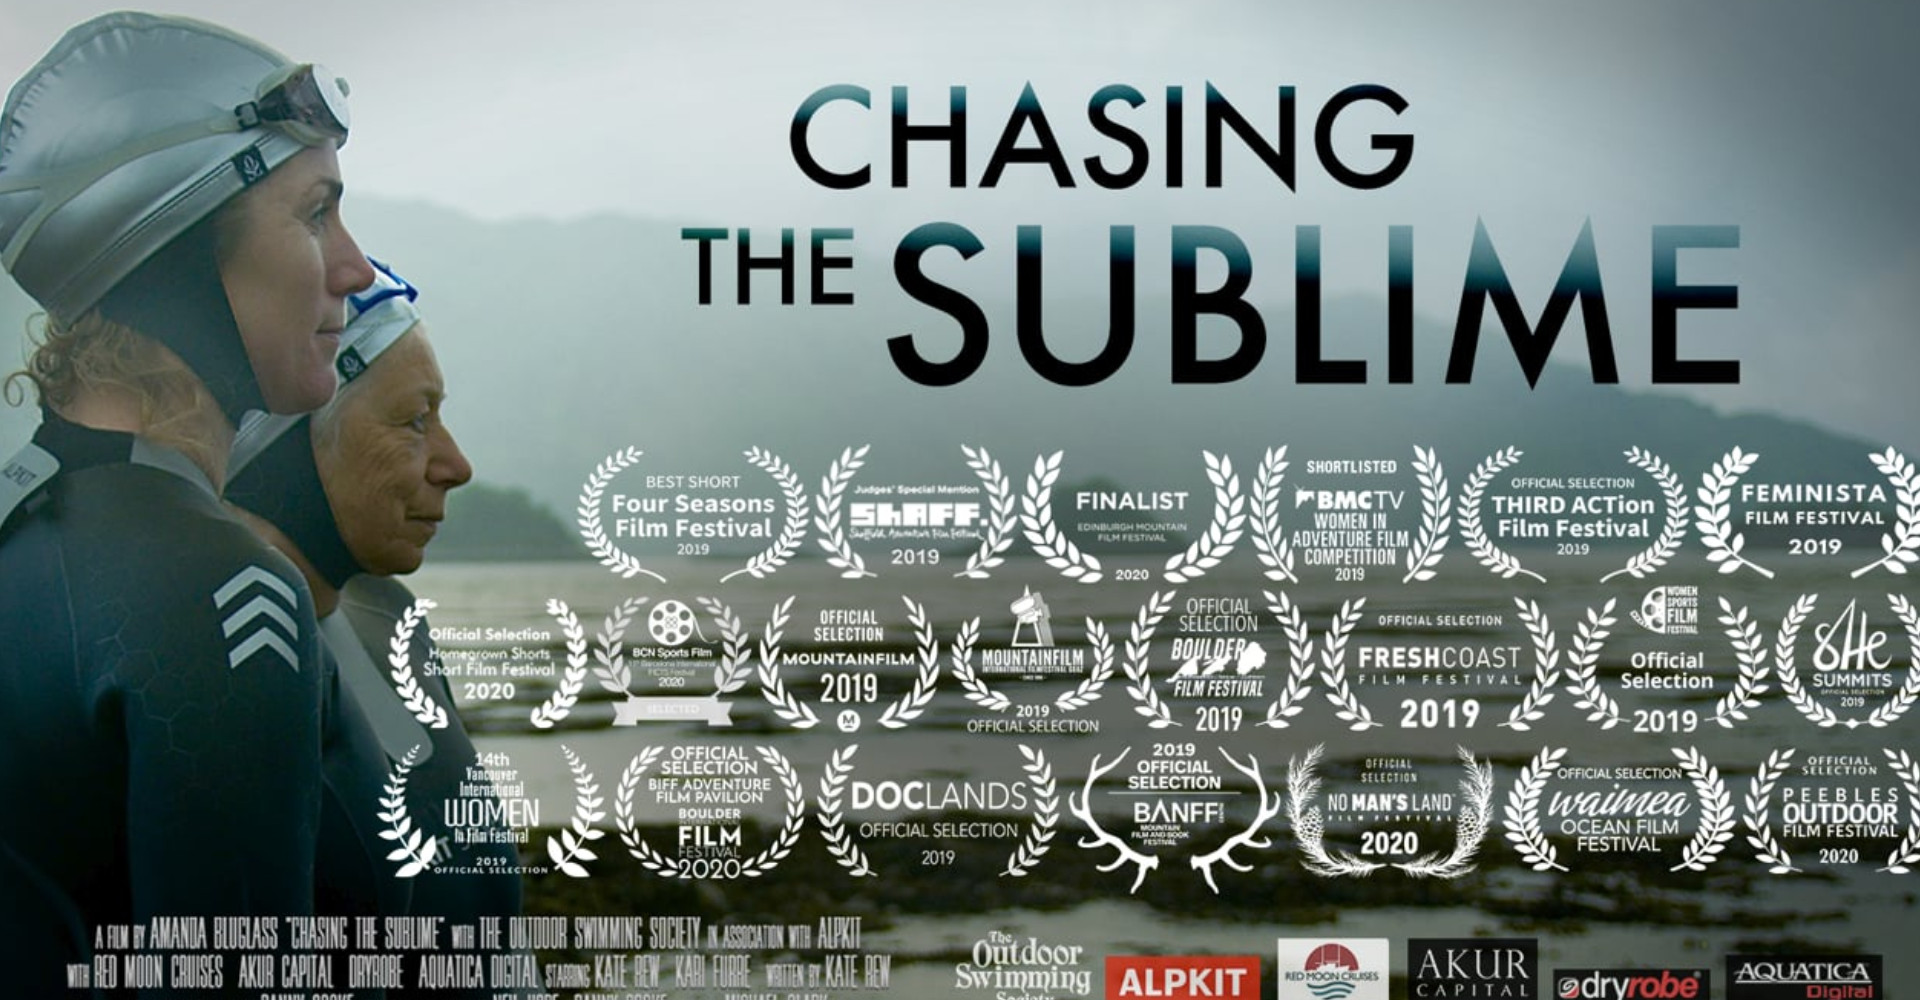 film poster for chasing the sublime